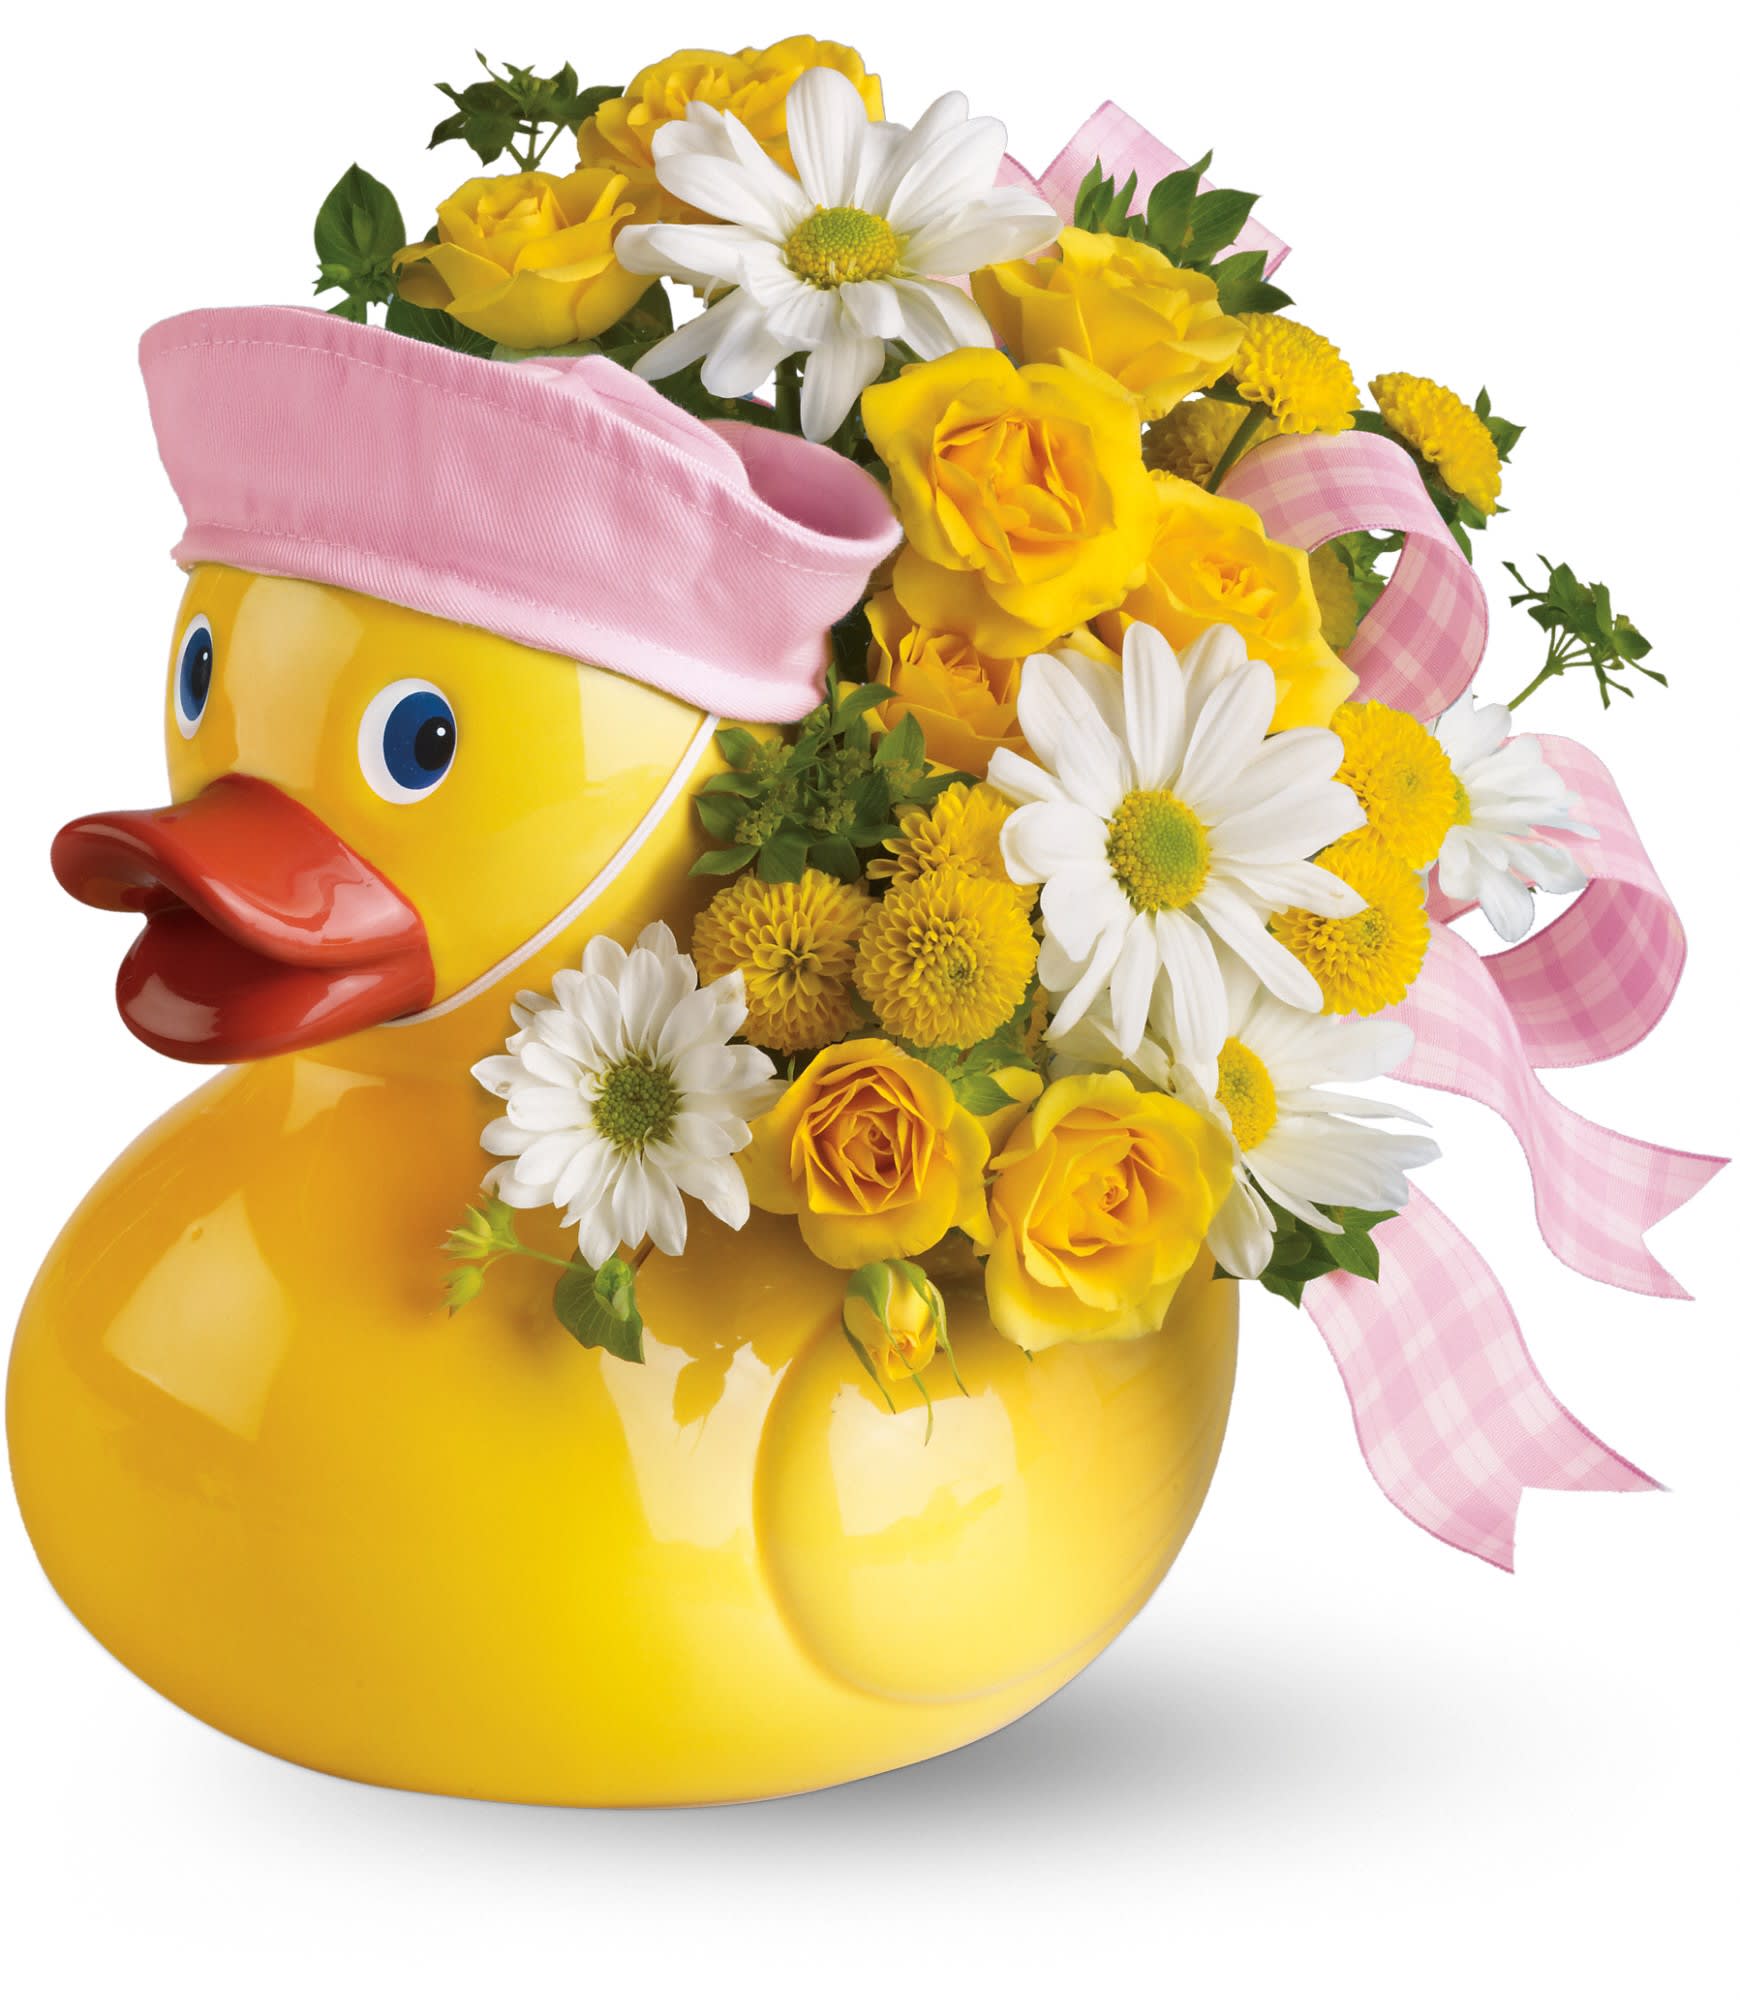 Ducky Delight - Girl - This adorable arrangement takes to baby showers and baby arrivals like a duck takes to water! Available in boy and girl versions, this charming arrangement in its cute and reusable keepsake container is, well… just ducky!Same in white hat for &quot;adult&quot; fan! Call for options!